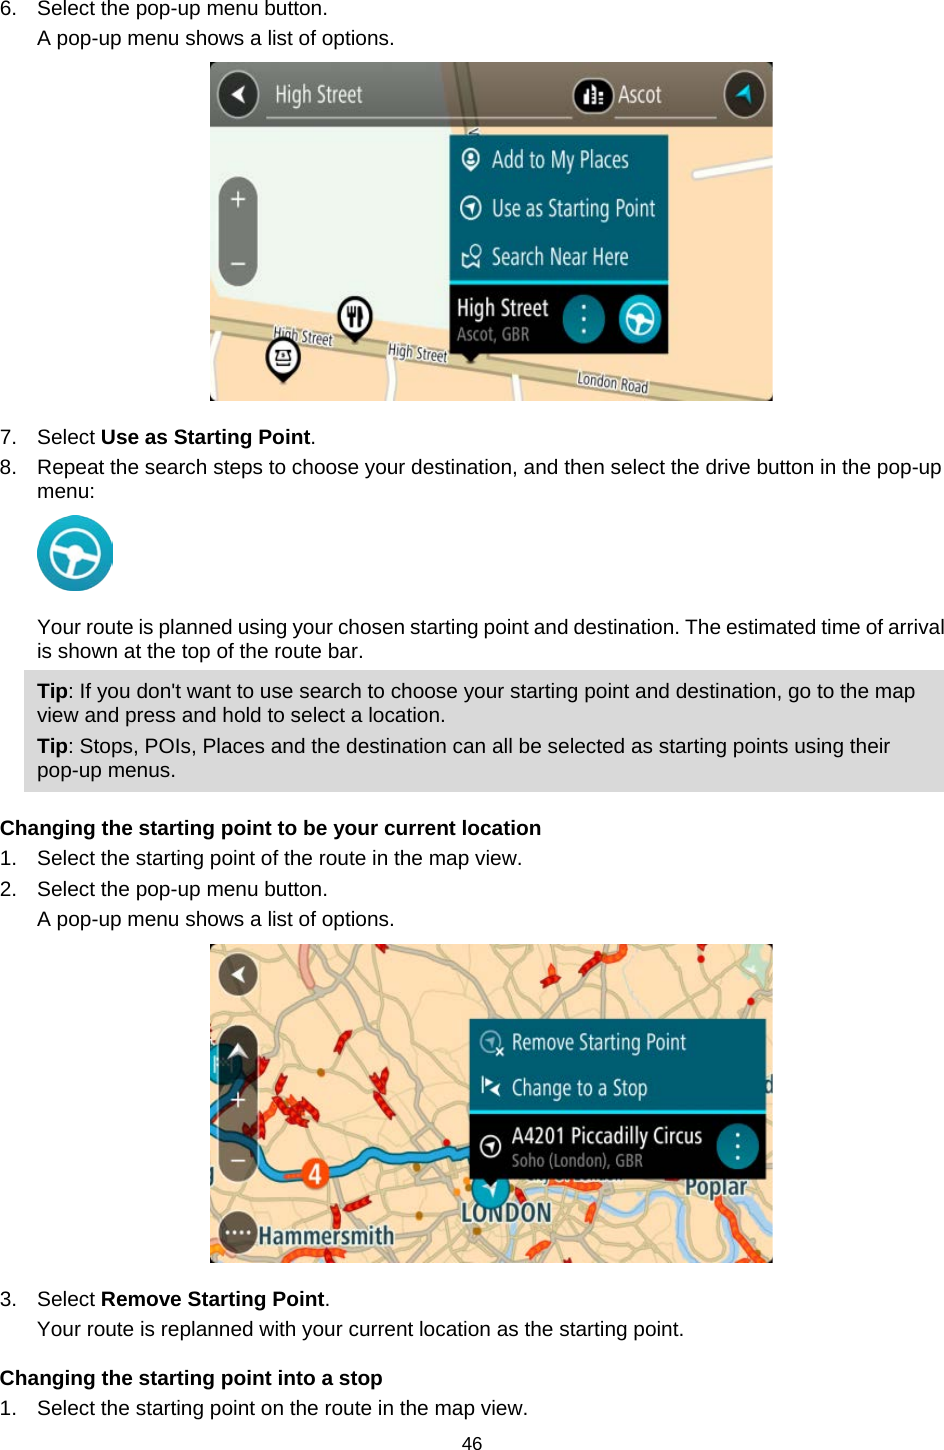  6. Select the pop-up menu button. A pop-up menu shows a list of options.  7. Select Use as Starting Point. 8. Repeat the search steps to choose your destination, and then select the drive button in the pop-up menu:  Your route is planned using your chosen starting point and destination. The estimated time of arrival is shown at the top of the route bar. Tip: If you don&apos;t want to use search to choose your starting point and destination, go to the map view and press and hold to select a location. Tip: Stops, POIs, Places and the destination can all be selected as starting points using their pop-up menus.  Changing the starting point to be your current location 1. Select the starting point of the route in the map view. 2. Select the pop-up menu button. A pop-up menu shows a list of options.  3. Select Remove Starting Point. Your route is replanned with your current location as the starting point. Changing the starting point into a stop 1. Select the starting point on the route in the map view. 46   